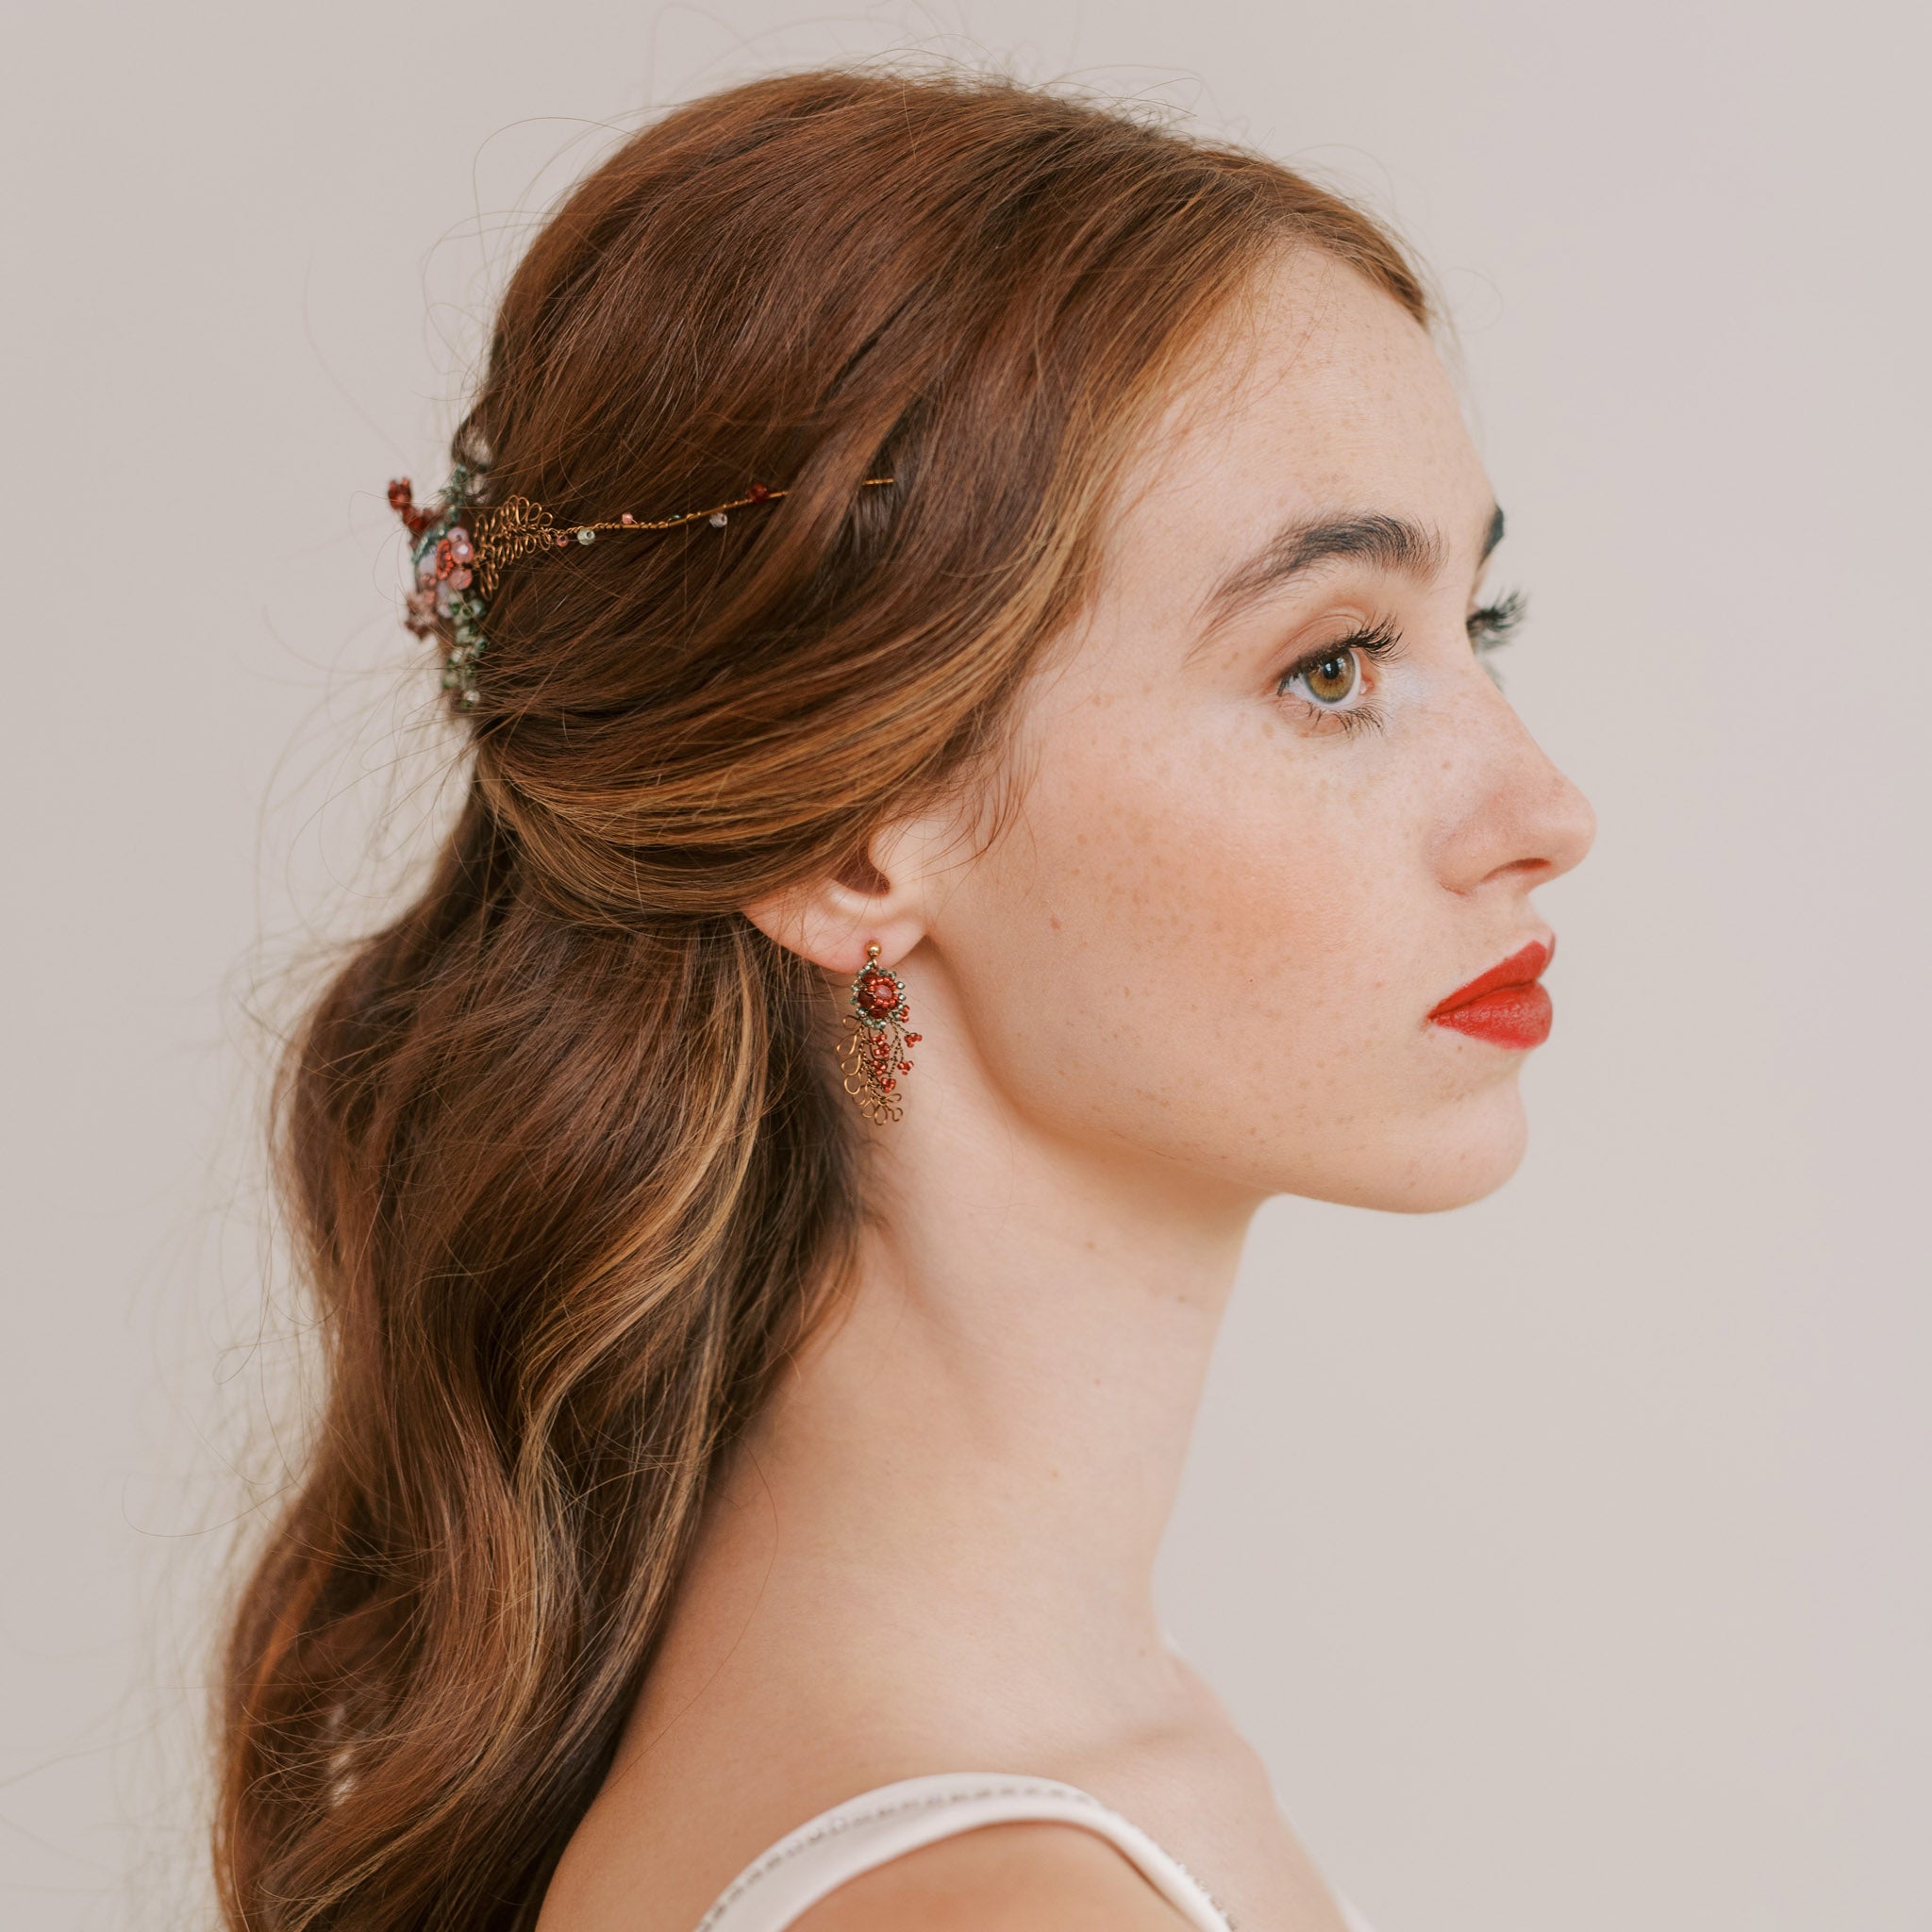 Edera earrings with beaded flower and wire leaves by Judith Brown Bridal